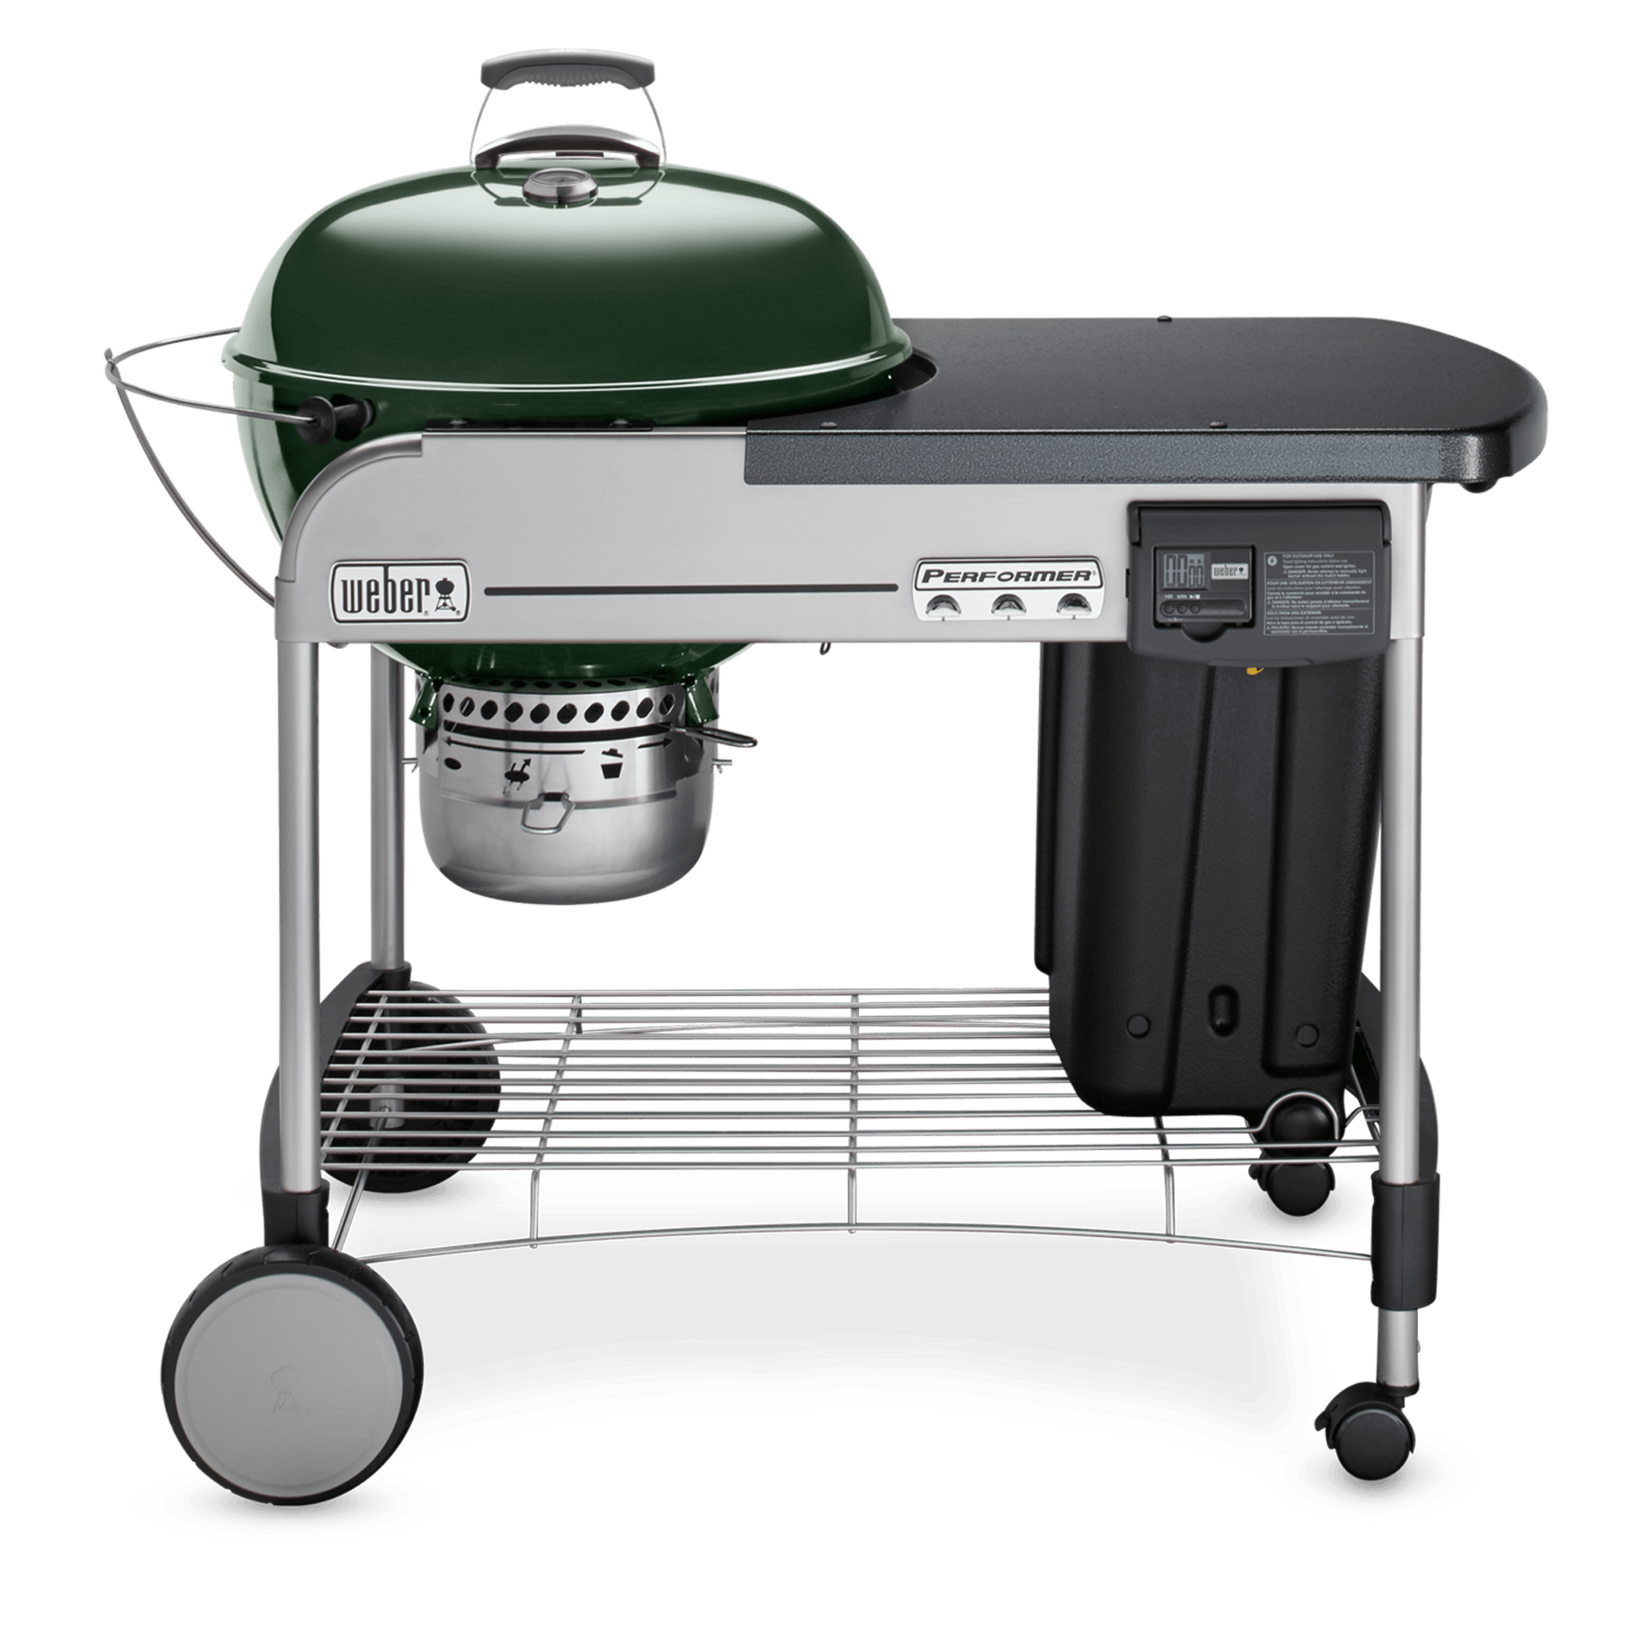 Weber Performer® Deluxe 22” Charcoal Grill, Green